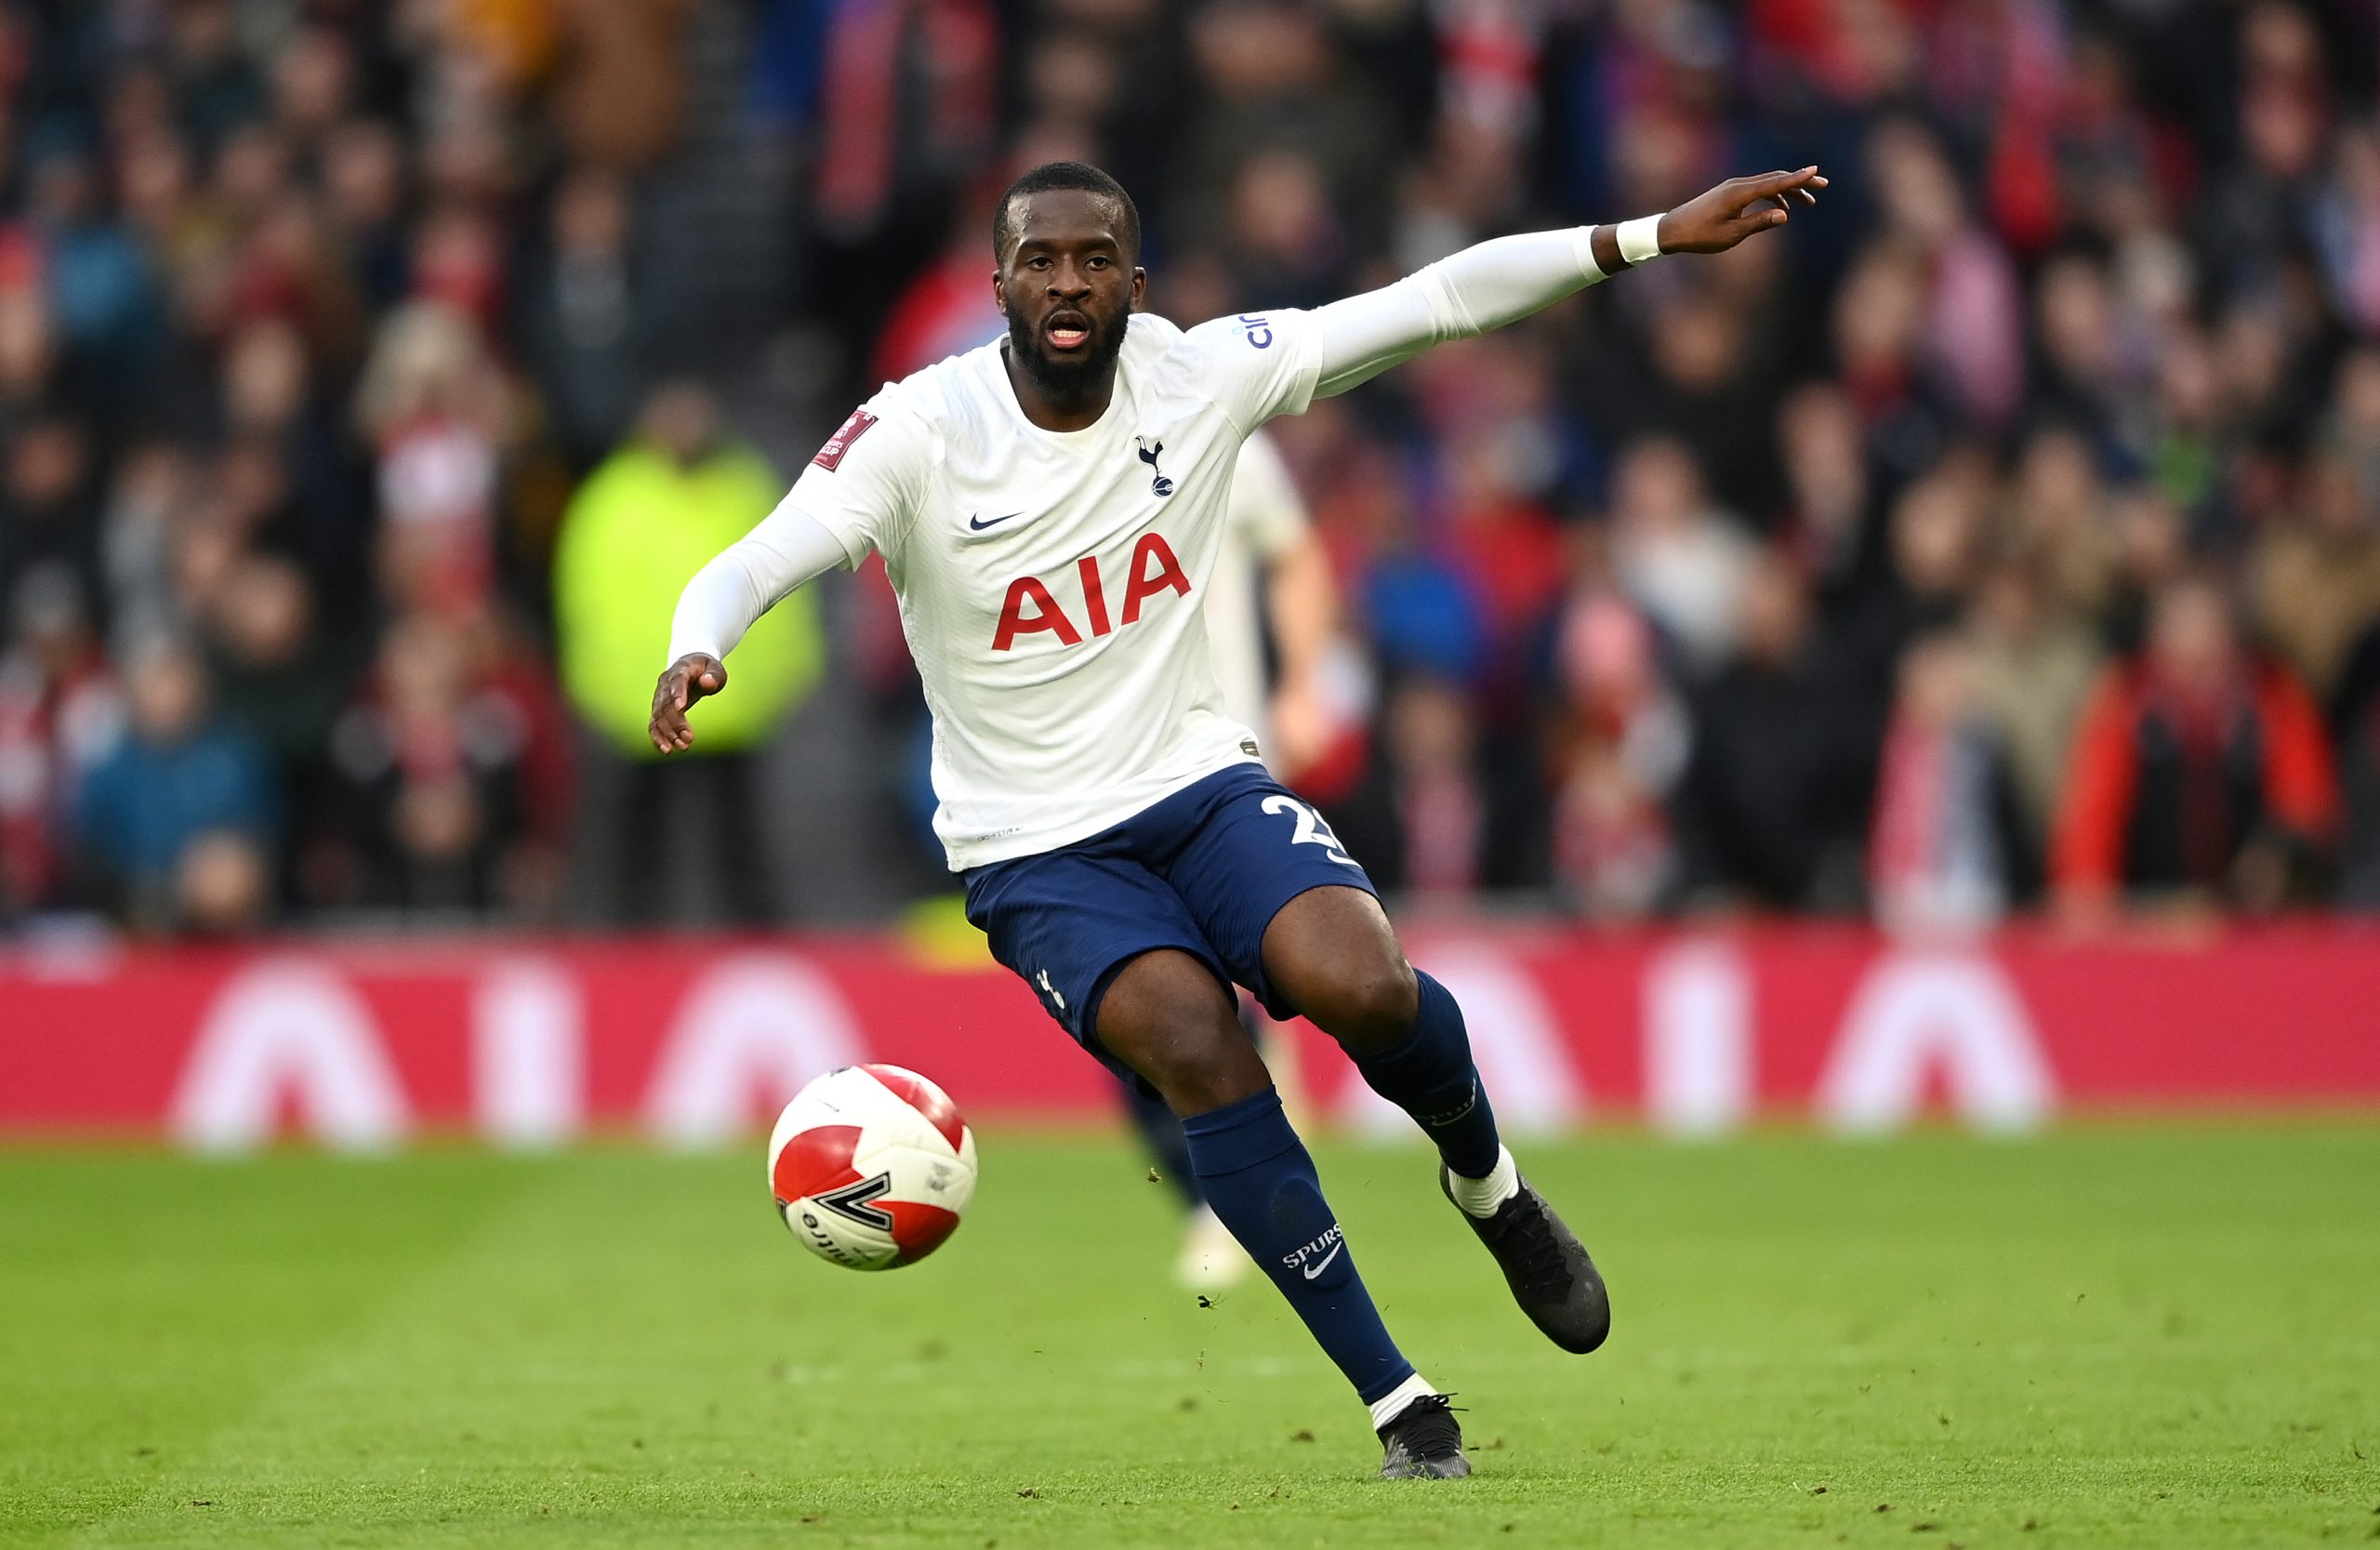 Tanguy Ndombele could return to Spurs from Galatasaray loan spell in January.